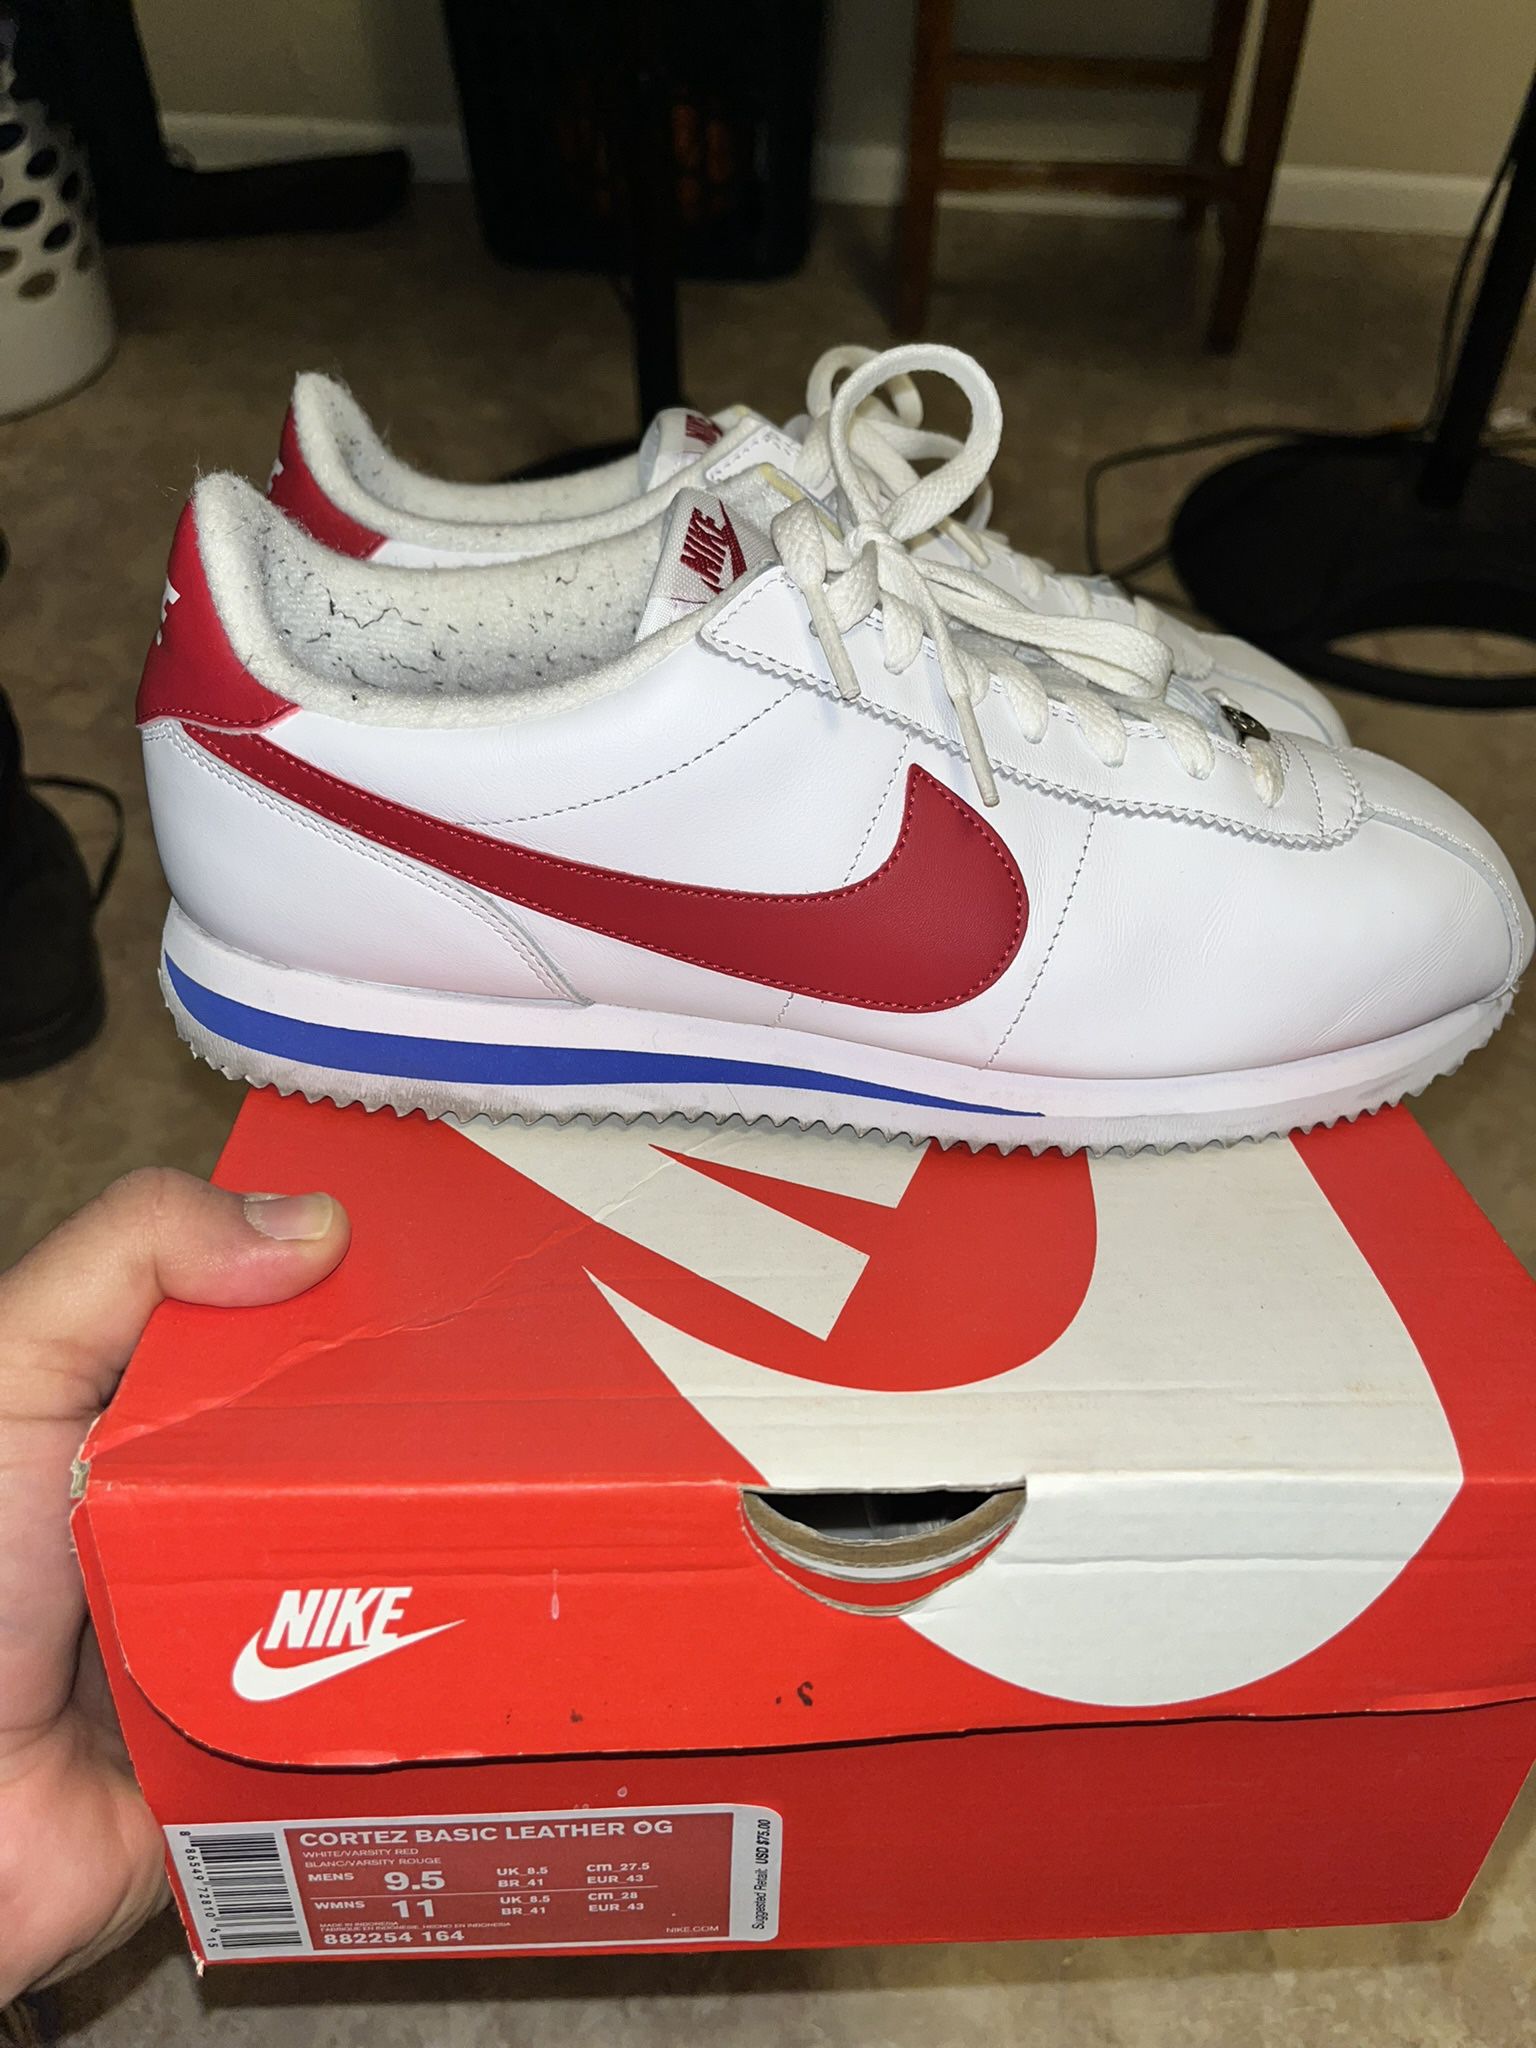 Cortez for Sale in - OfferUp